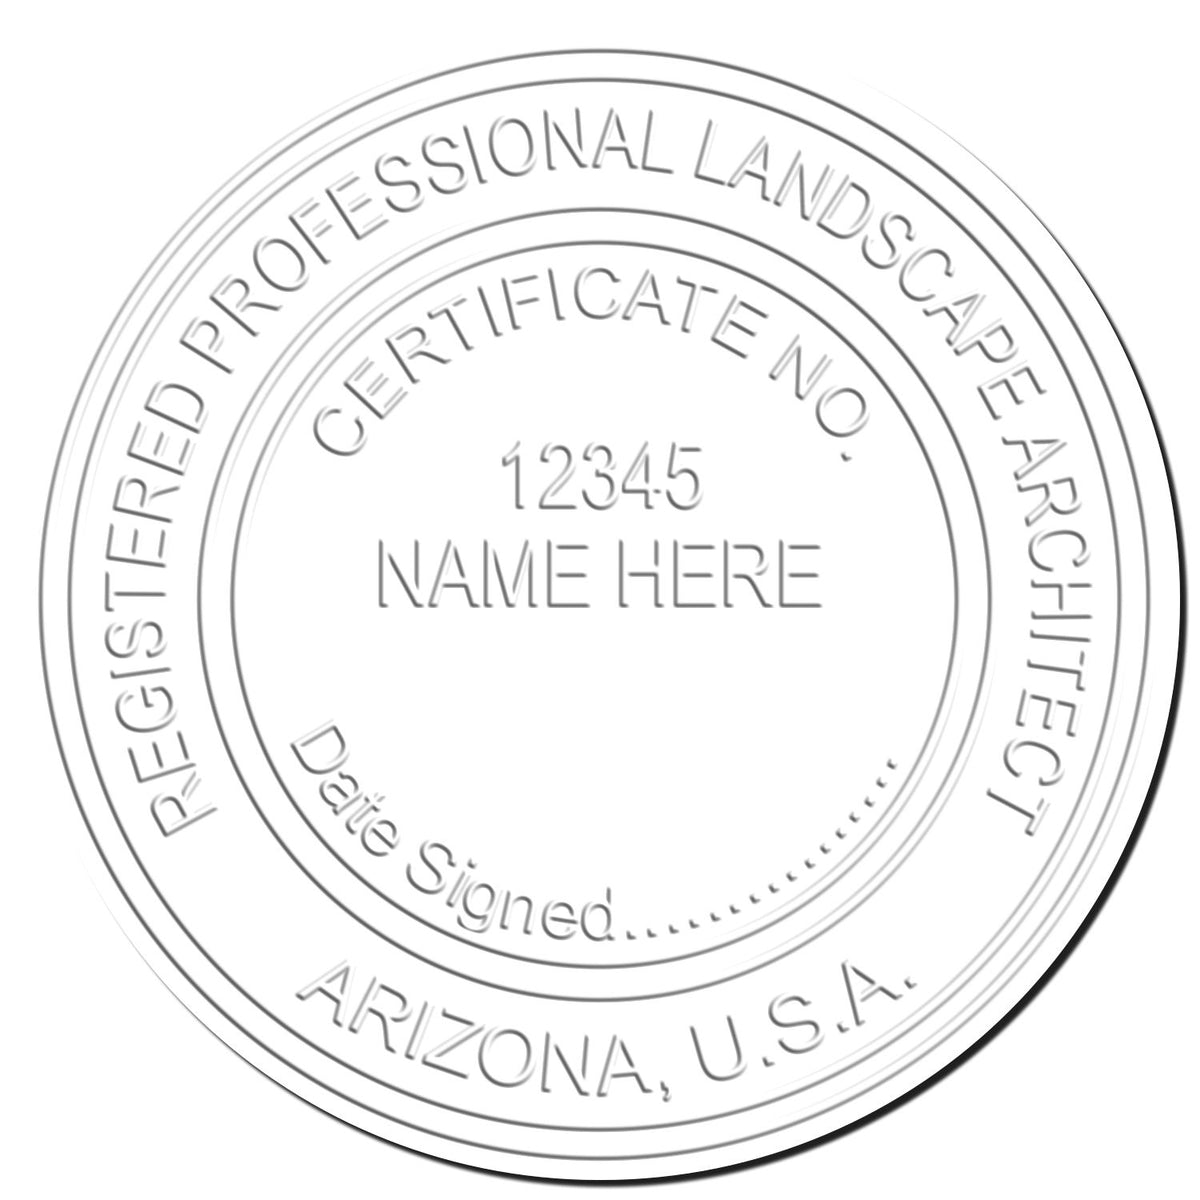 This paper is stamped with a sample imprint of the Gift Arizona Landscape Architect Seal, signifying its quality and reliability.